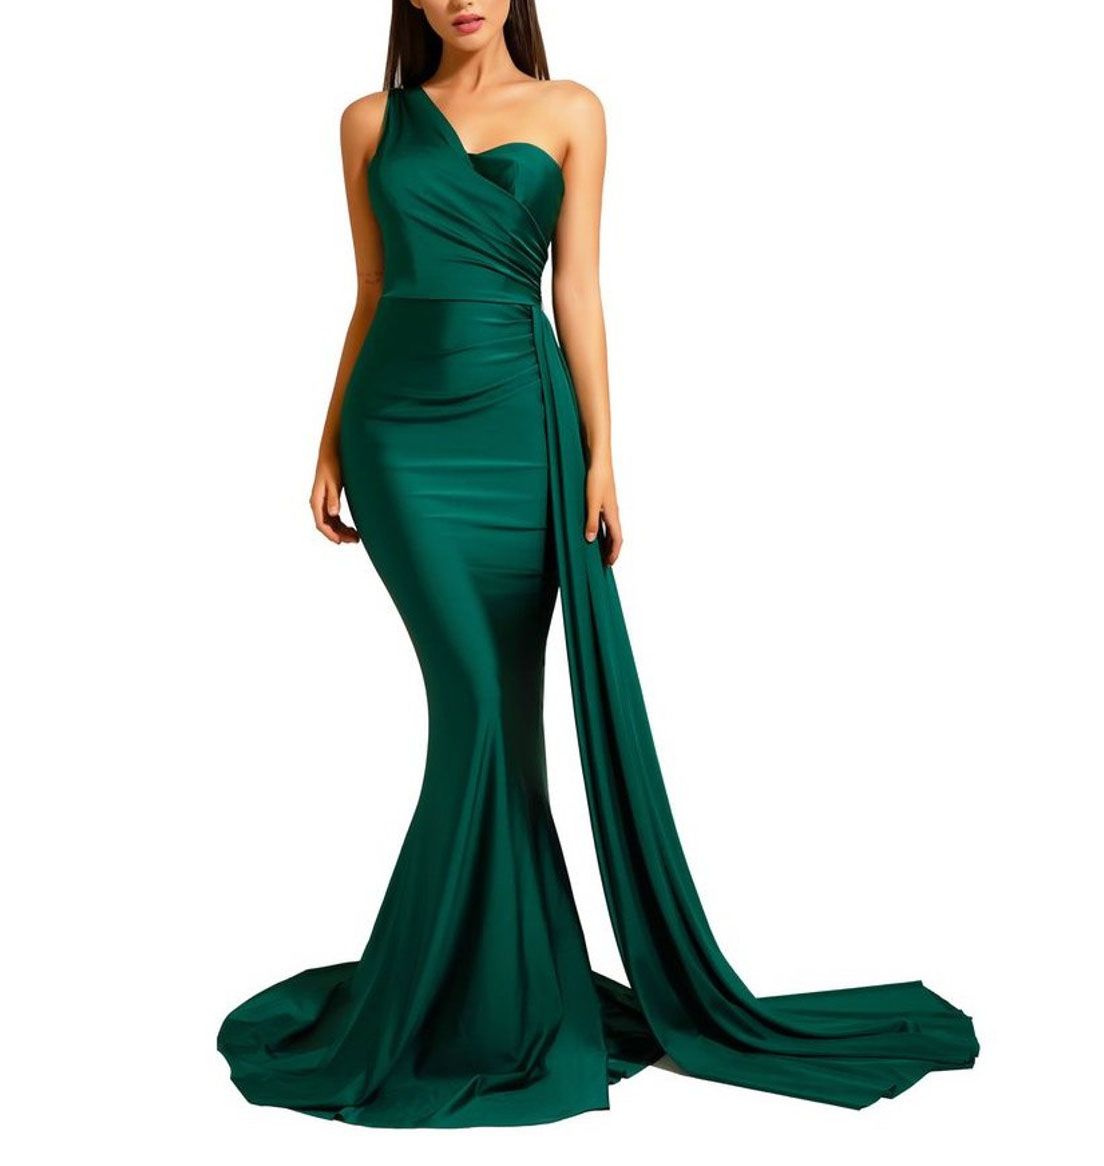 Style Emerald Green Sweetheart Neck One Shoulder Mermaid Gown Amelia  Size 6 Wedding Guest One Shoulder Green Mermaid Dress on Queenly